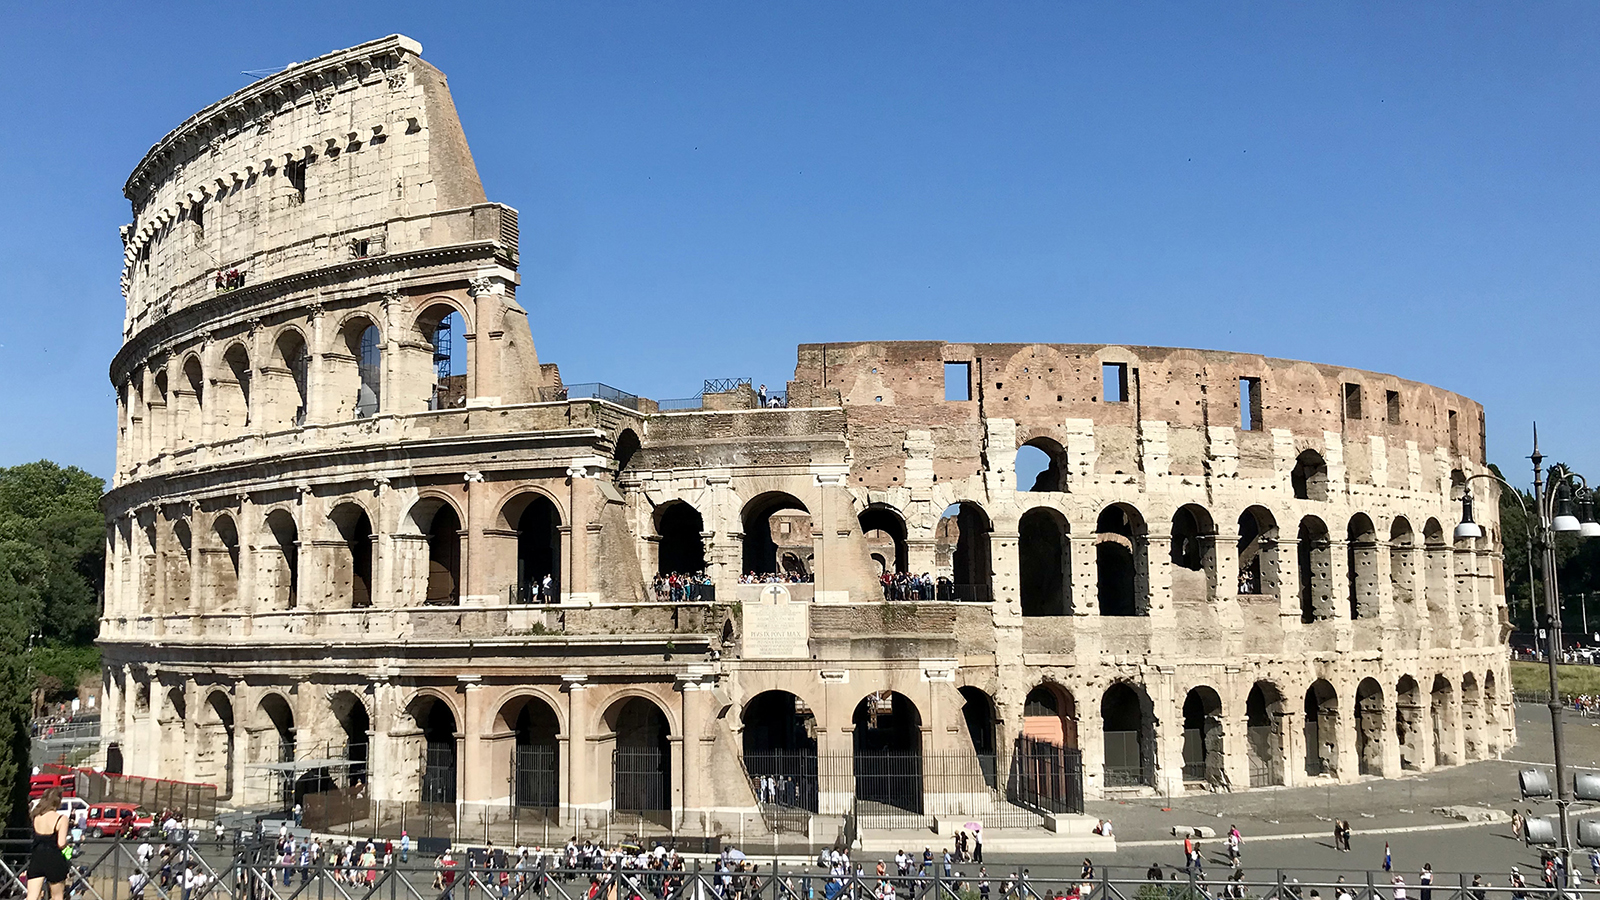 Color photograph of the full Roman Colosseum on a sunny, cloudless day with blue skies